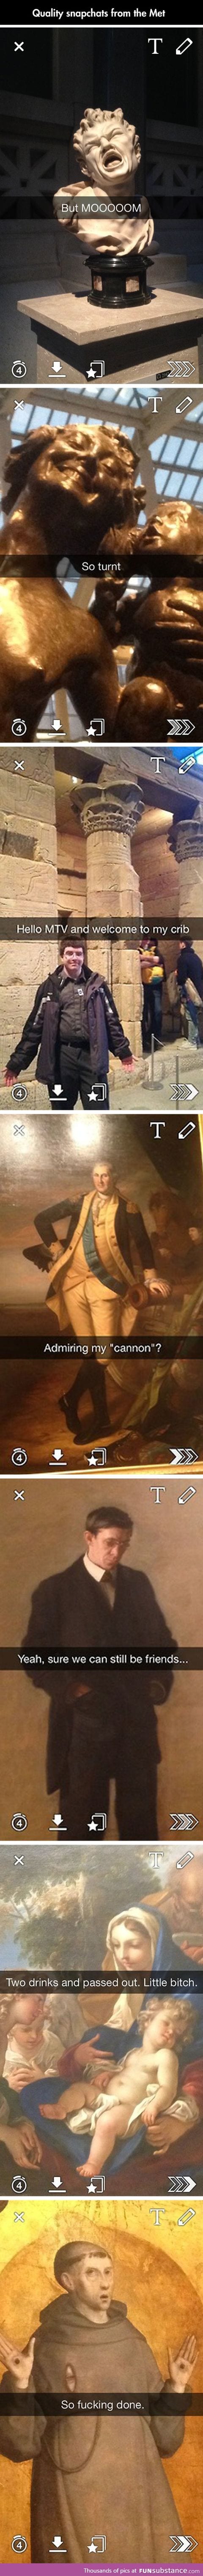 Hilarious snapchatthing at the art museum